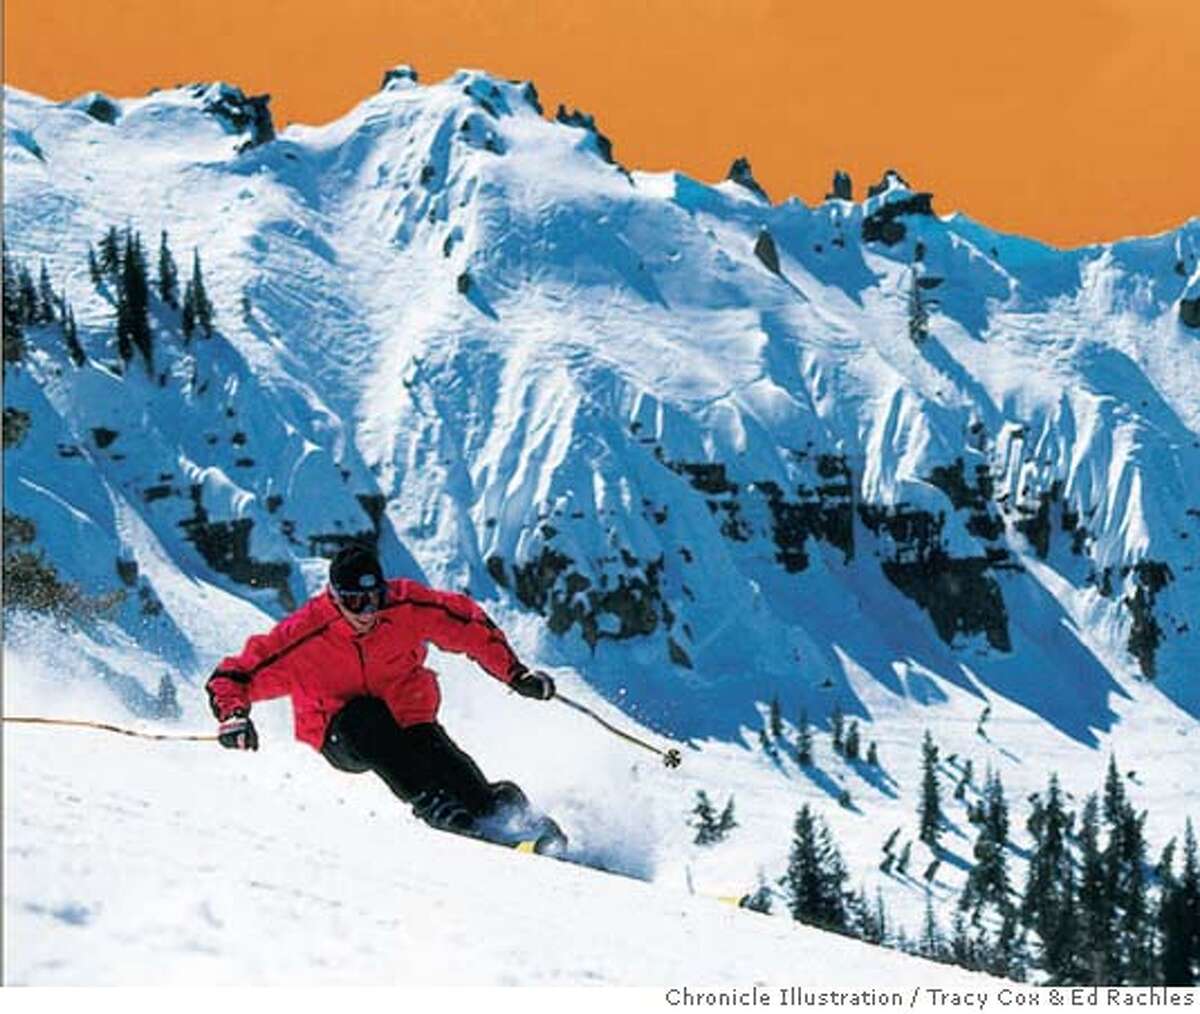 Ski resorts fight global warming. Chronicle photo illustration by Tracy Cox and Ed Rachles